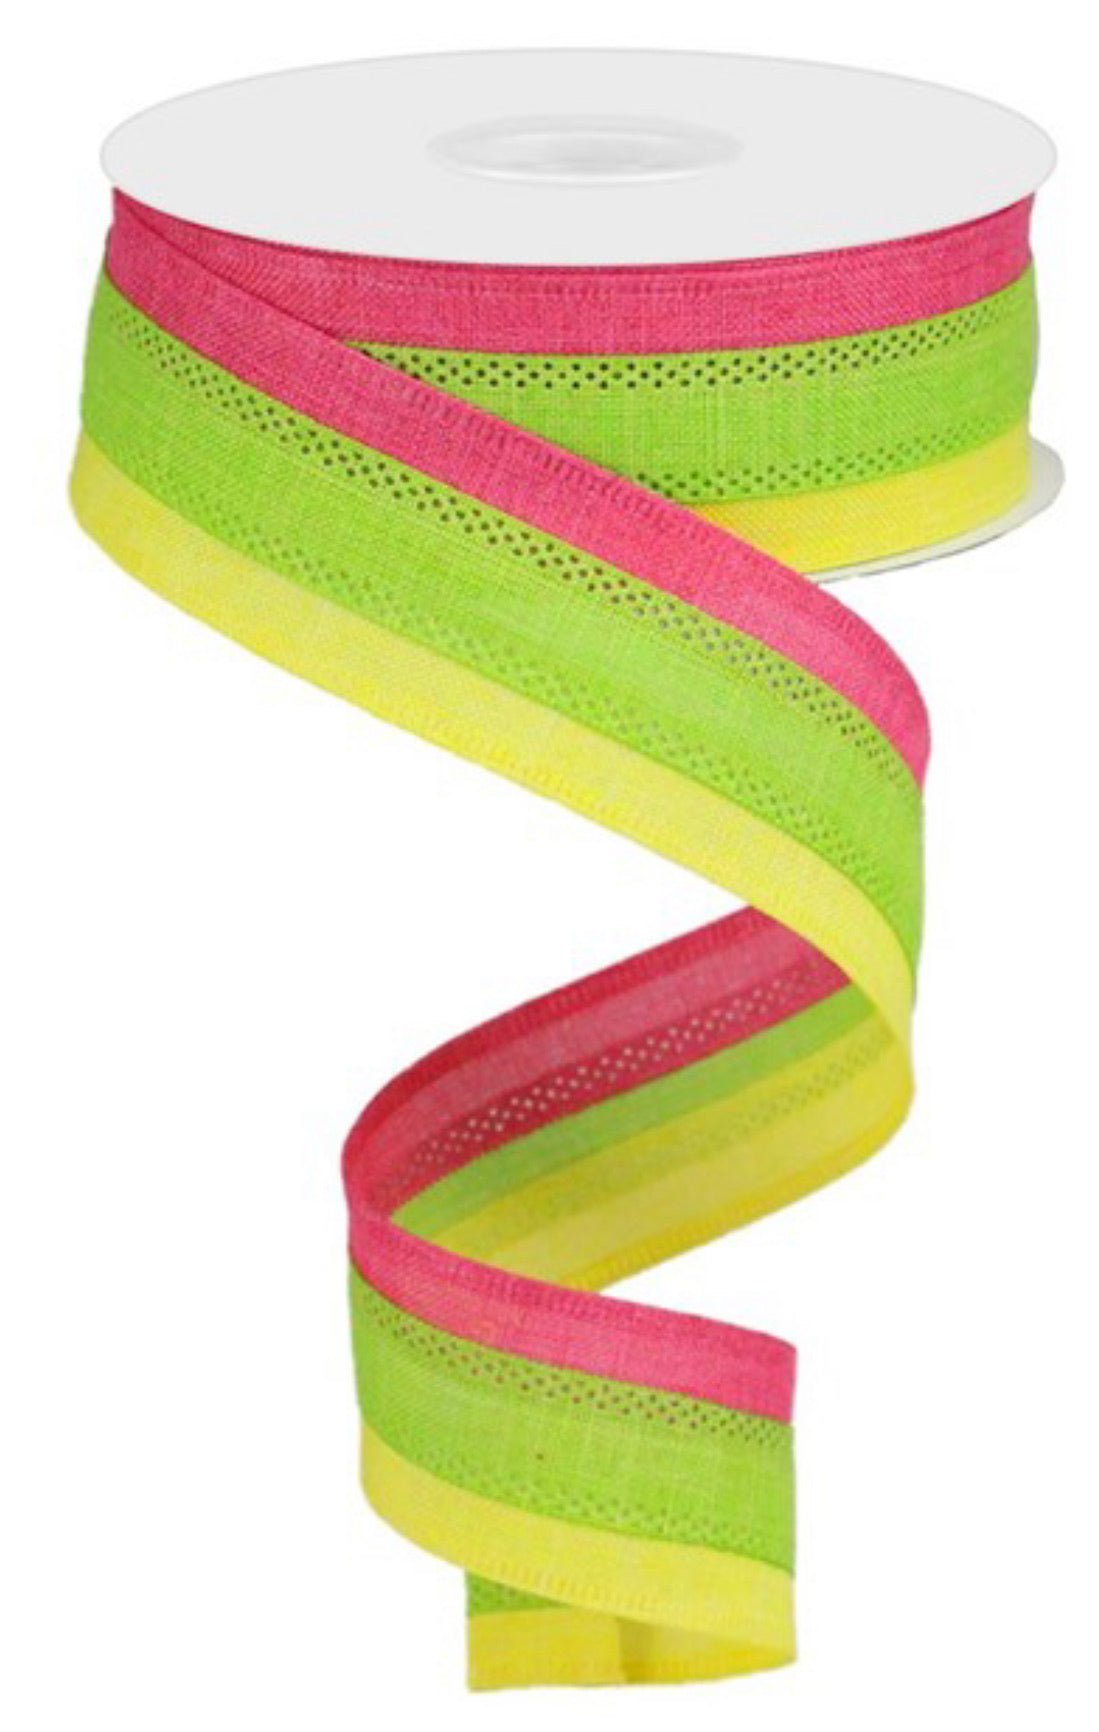 3 colors in 1 striped ribbon 1.5” - Greenery MarketWired ribbonRG01601M6